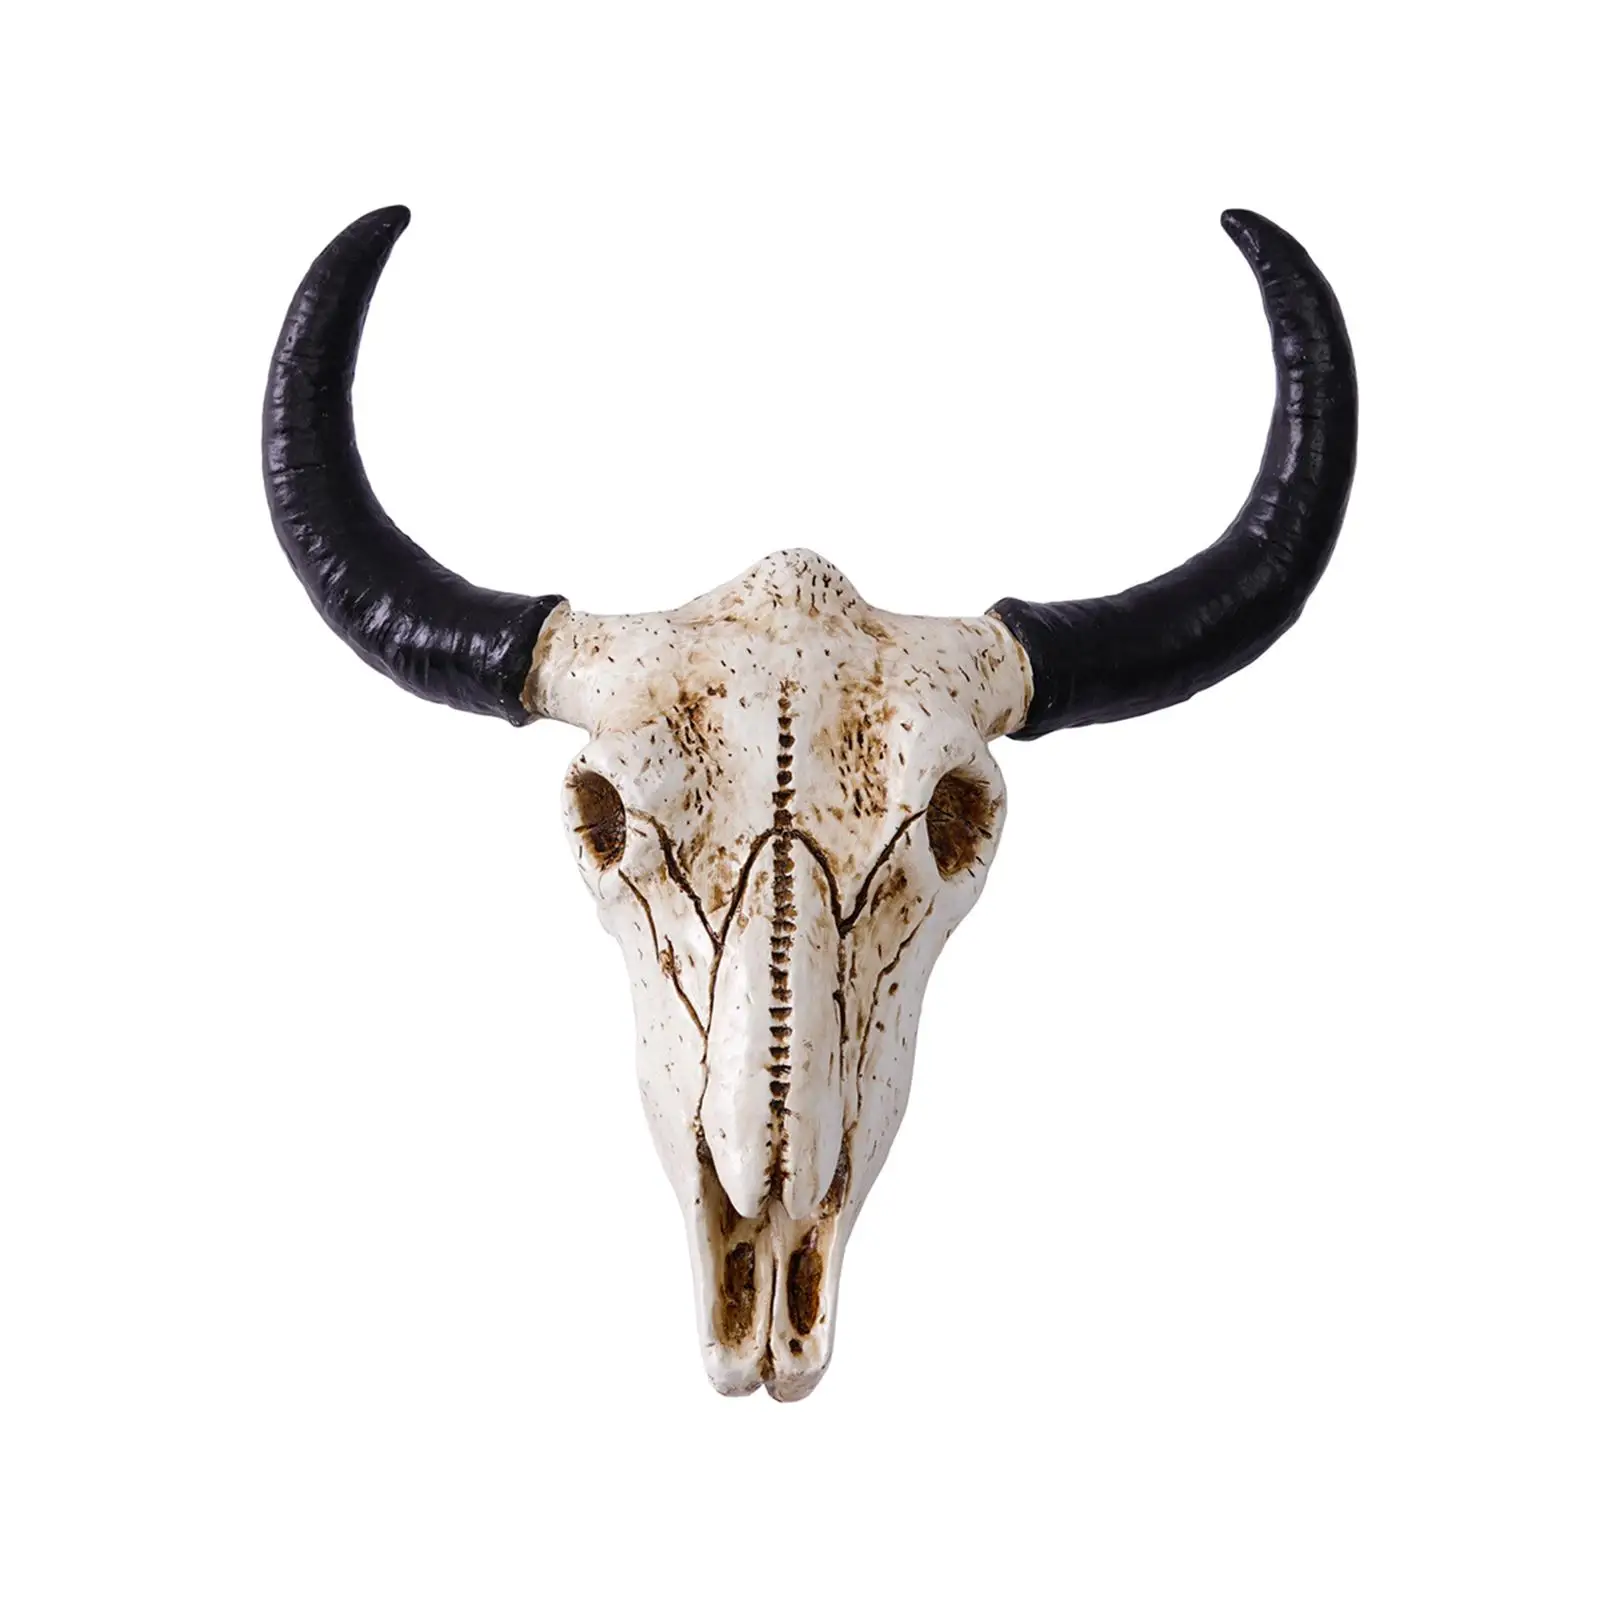 3D Bull Skull Sculpture Animal Cow Skull Head Animal Head Figurine Cow Skull Statue for Office Decoration Collection